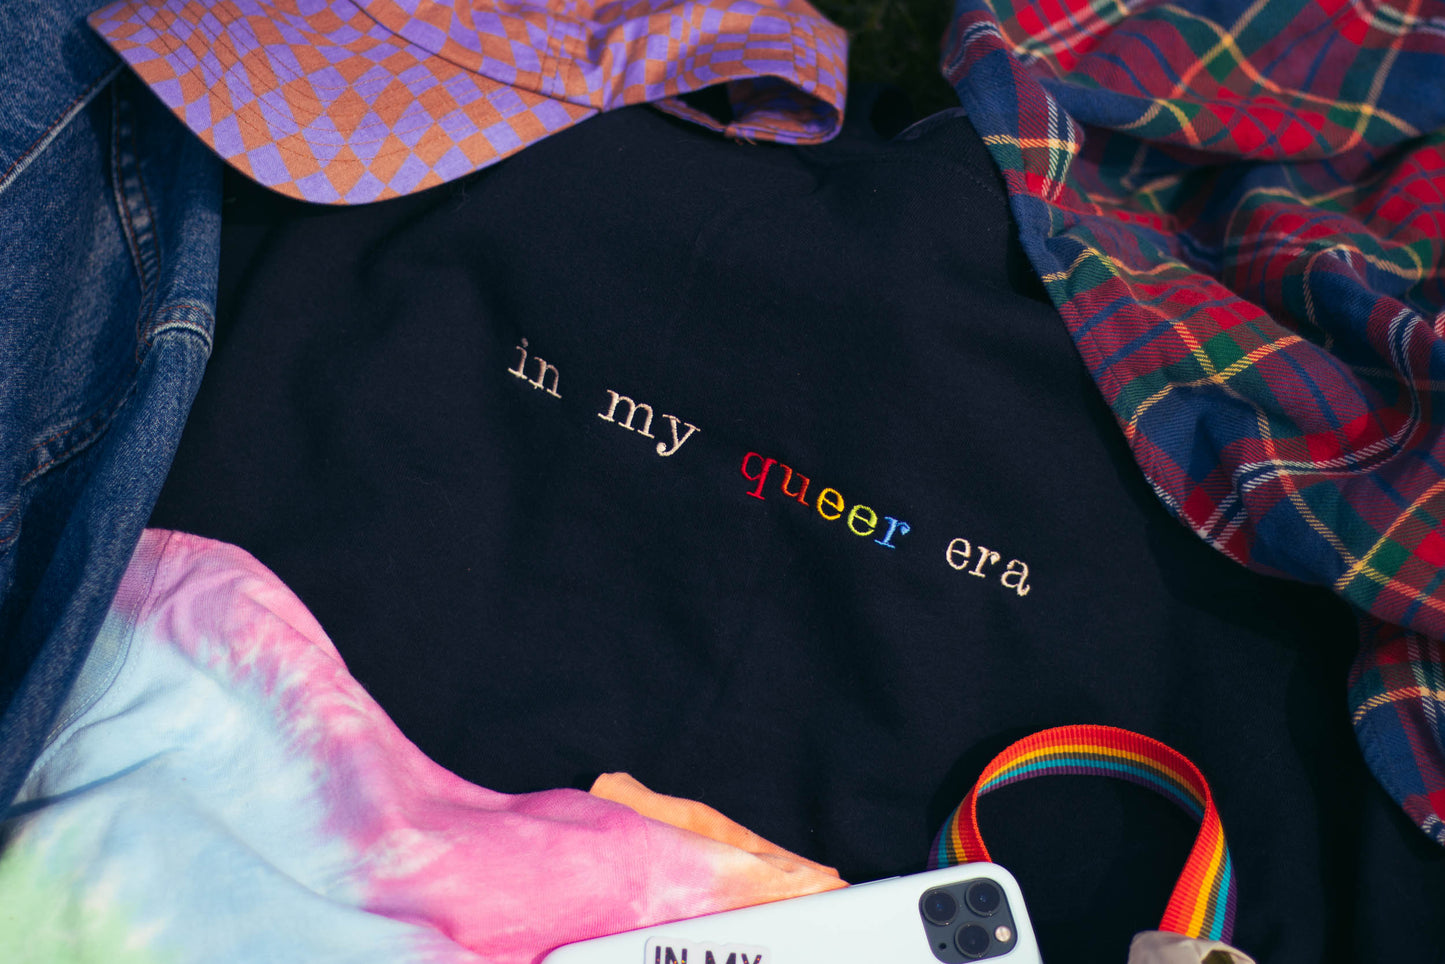 A closeup flatlay of various items, including a black crew neck with "in my queer era" embroidered on it. Surrounding the crew neck is various items, such as a checkered hat, a flannel, a phone, a jean jacket, & a tie dye shirt.